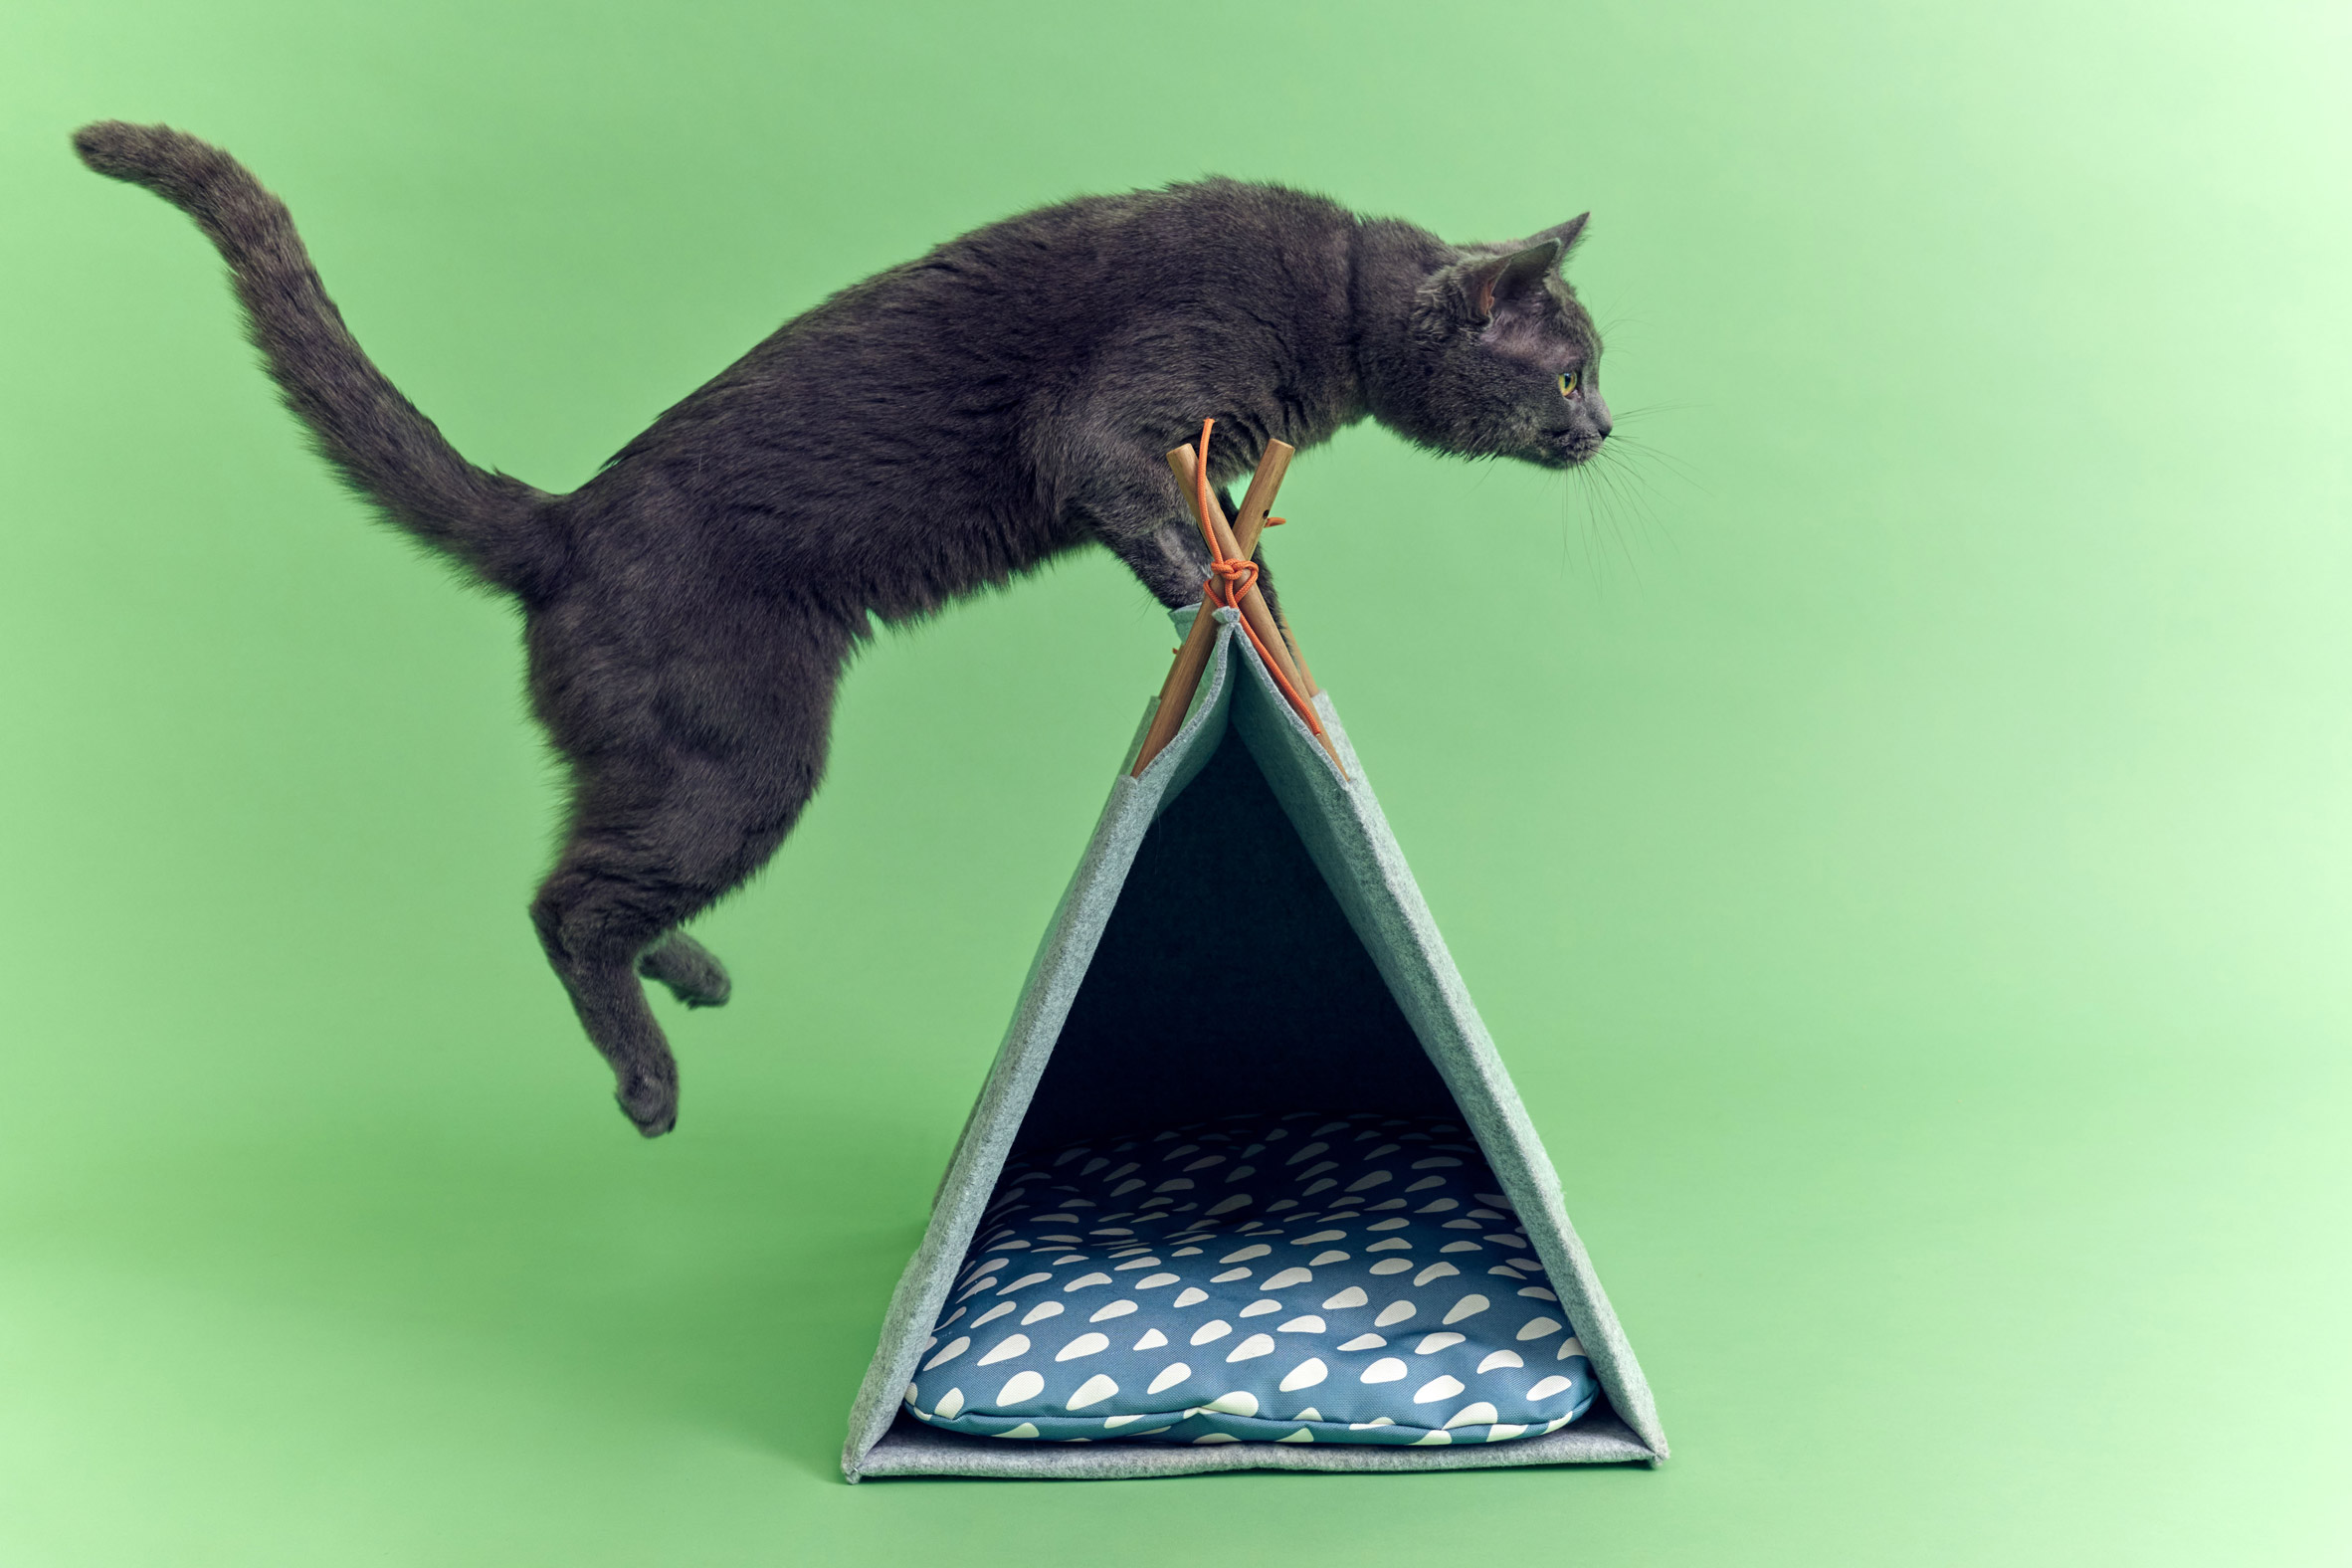 Pitched-roof cat bed from IKEA's pet range